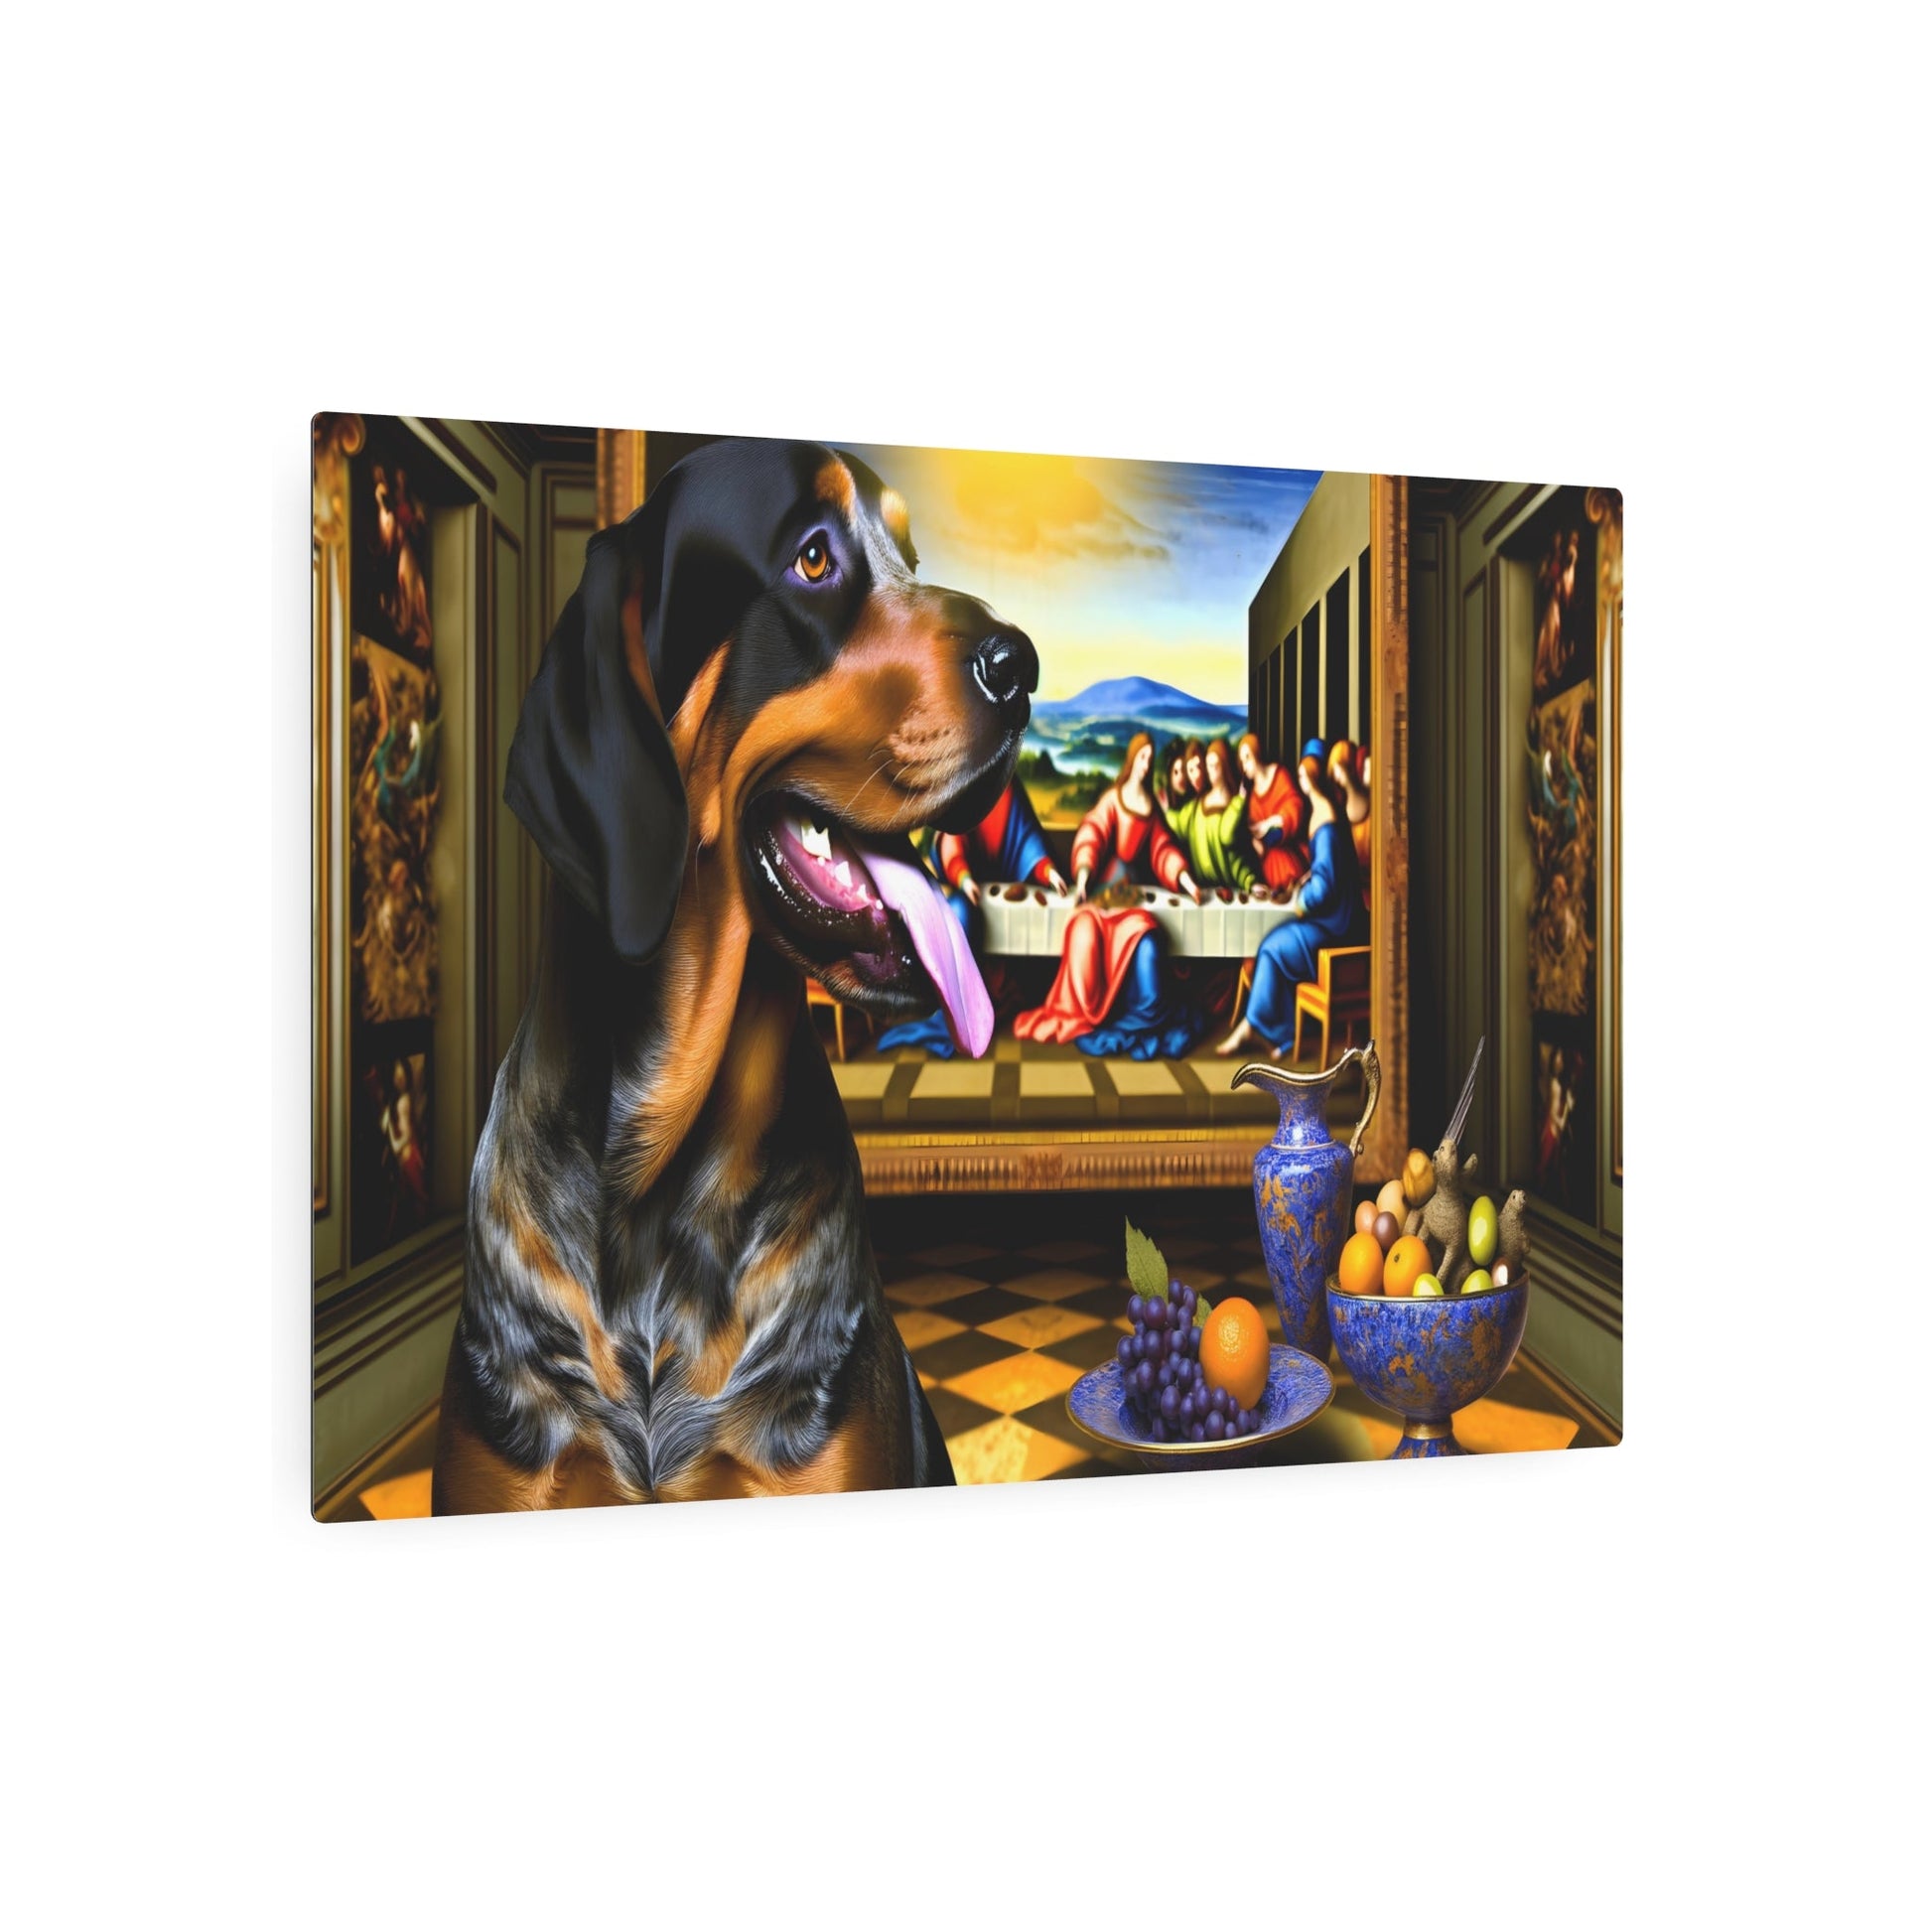 Metal Poster Art | "Majestic Renaissance-Style Noble Hunting Dog Painting - Detailed Western Art Styles Masterpiece with Rich Colors and Dramatic Lighting" - Metal Poster Art 36″ x 24″ (Horizontal) 0.12''